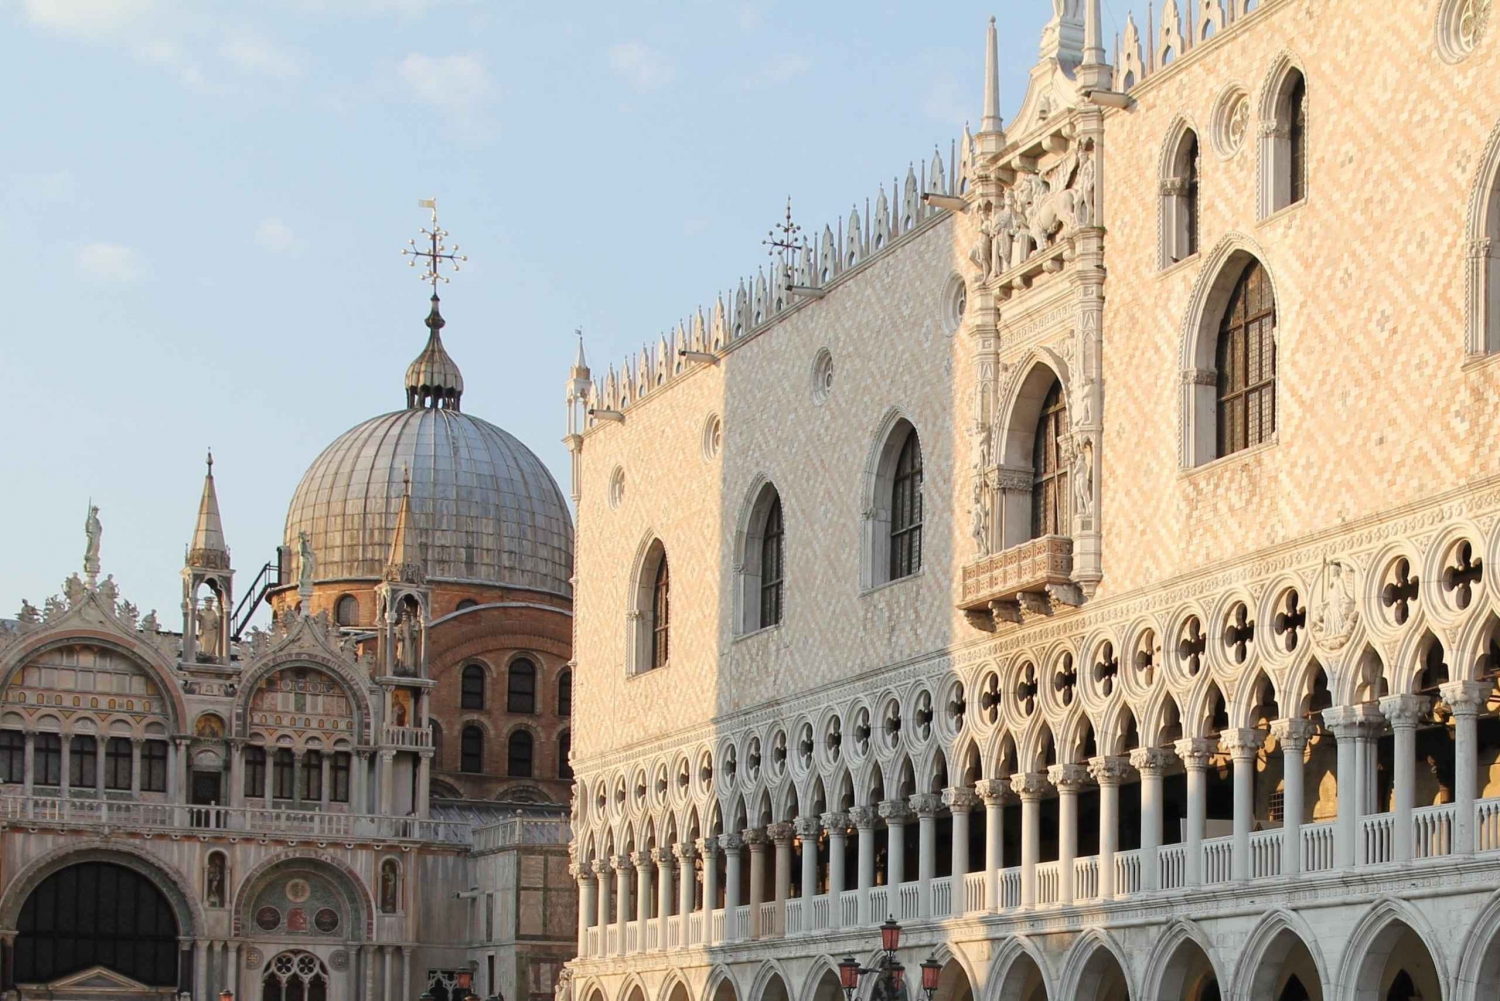 Venice: St. Mark's Basilica, Doge's Palace and Glass Factory